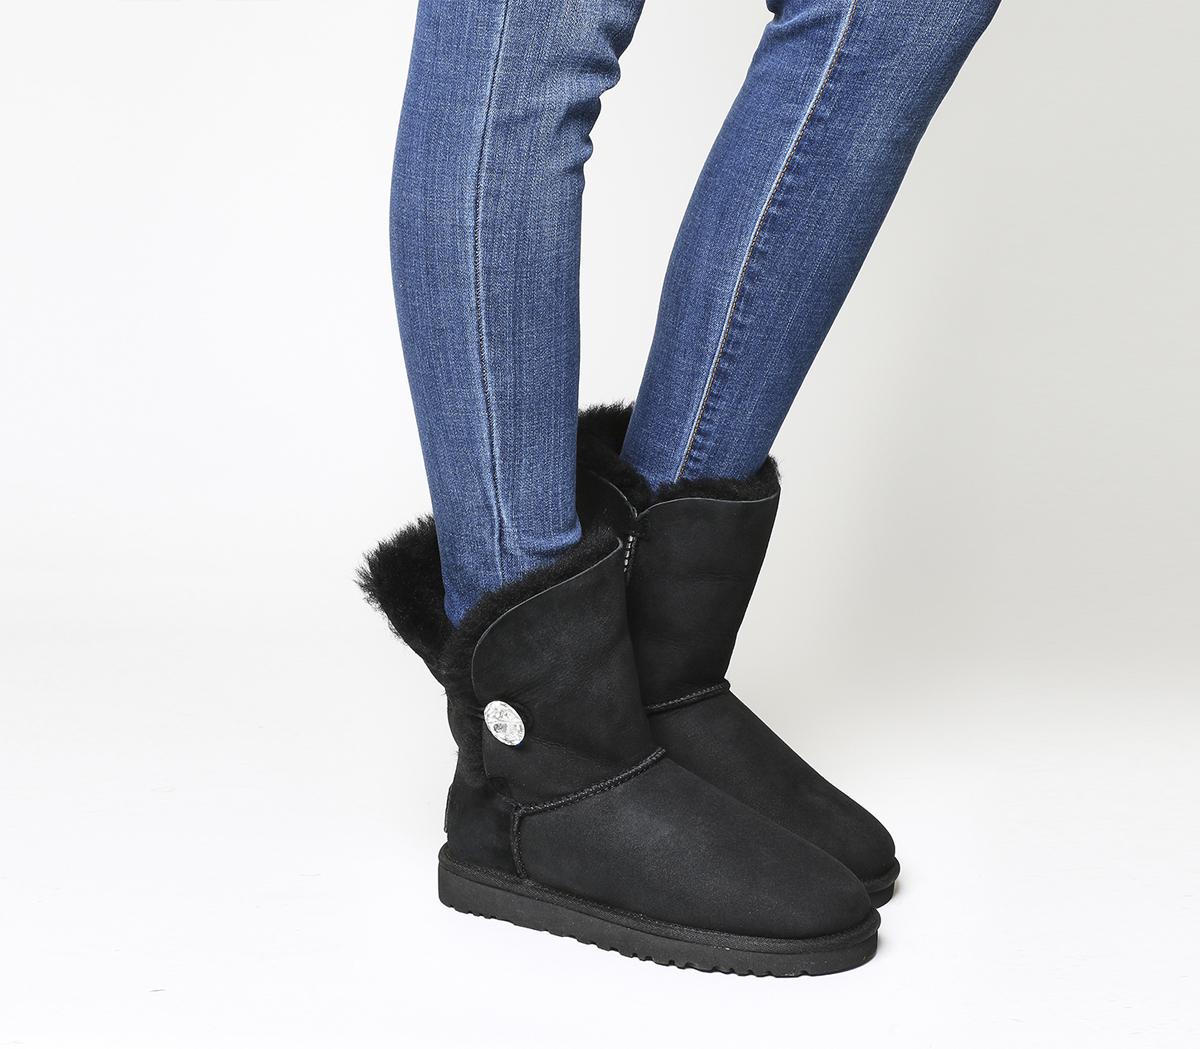 Buy > uggs bailey button black > in stock